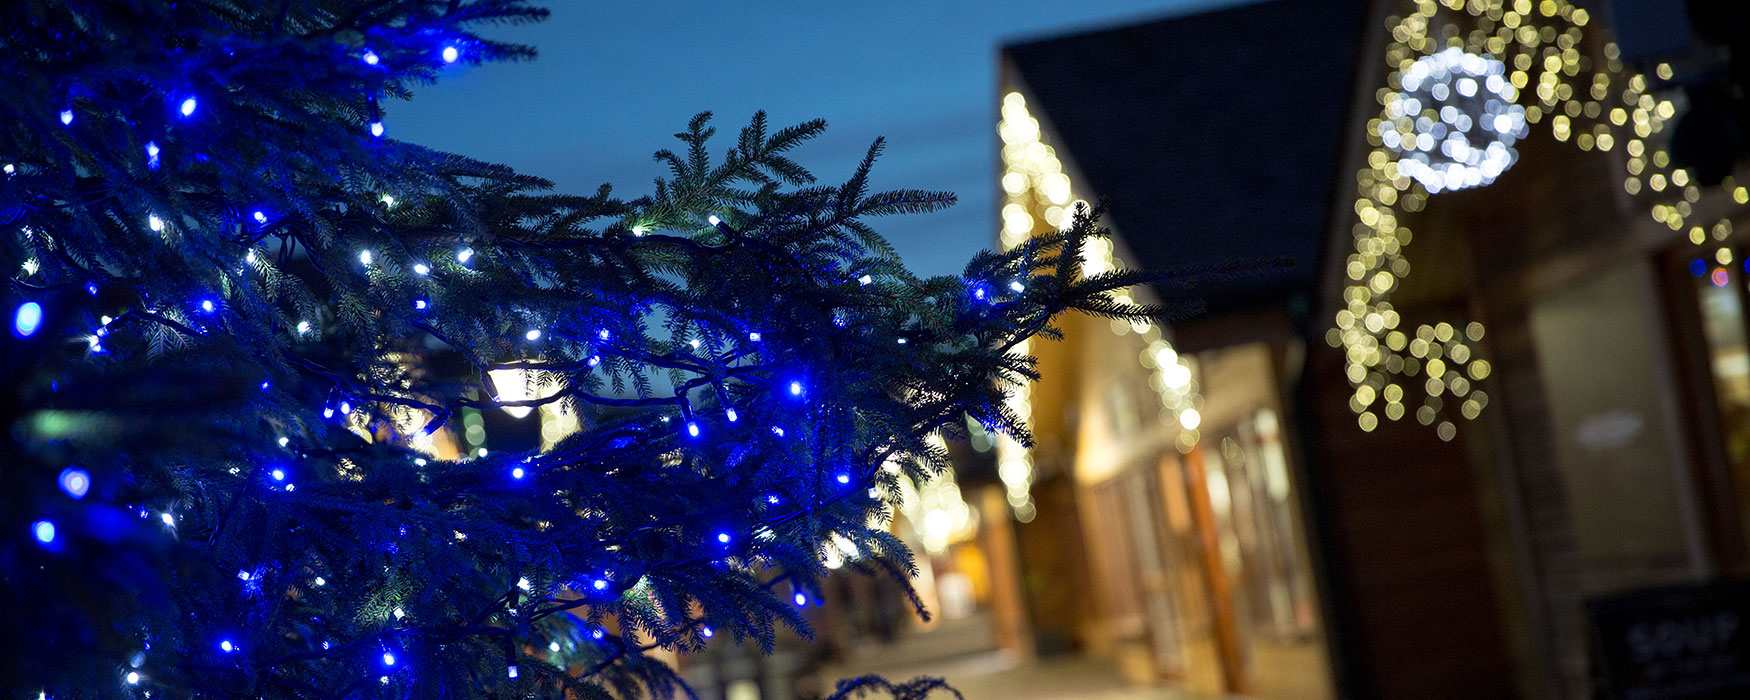 Christmas in the Trentham Shopping Village, Staffordshire.